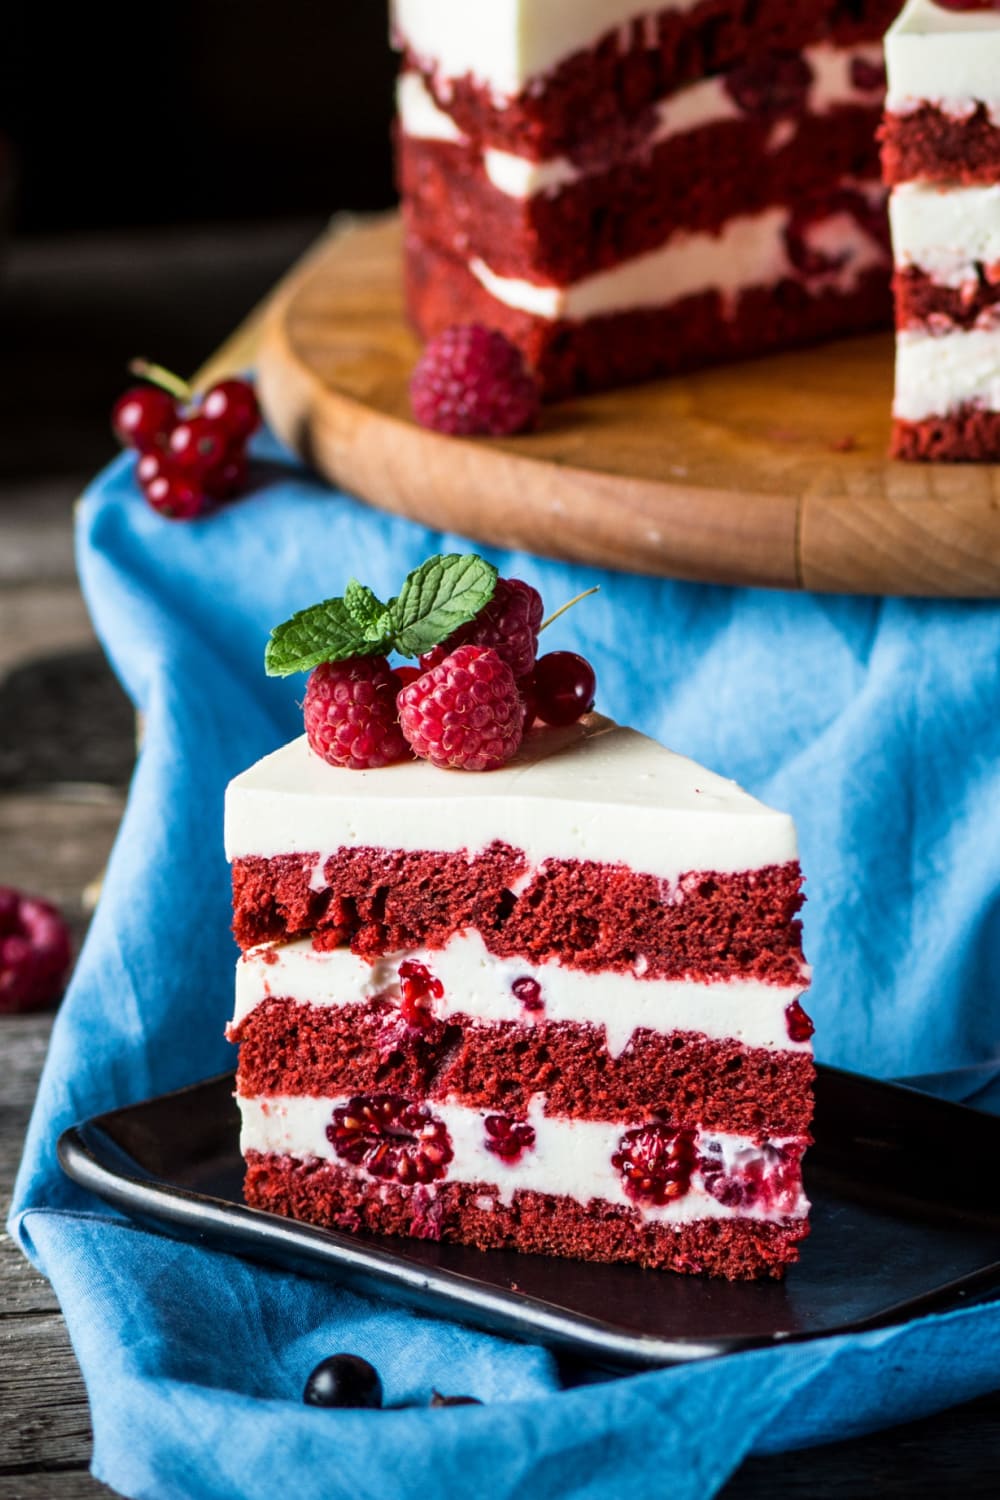 Slice of Red Velvet Cake Layered With Cream and Moist Cake, Topped With Fresh Raspberries Served on a Black Square Plate